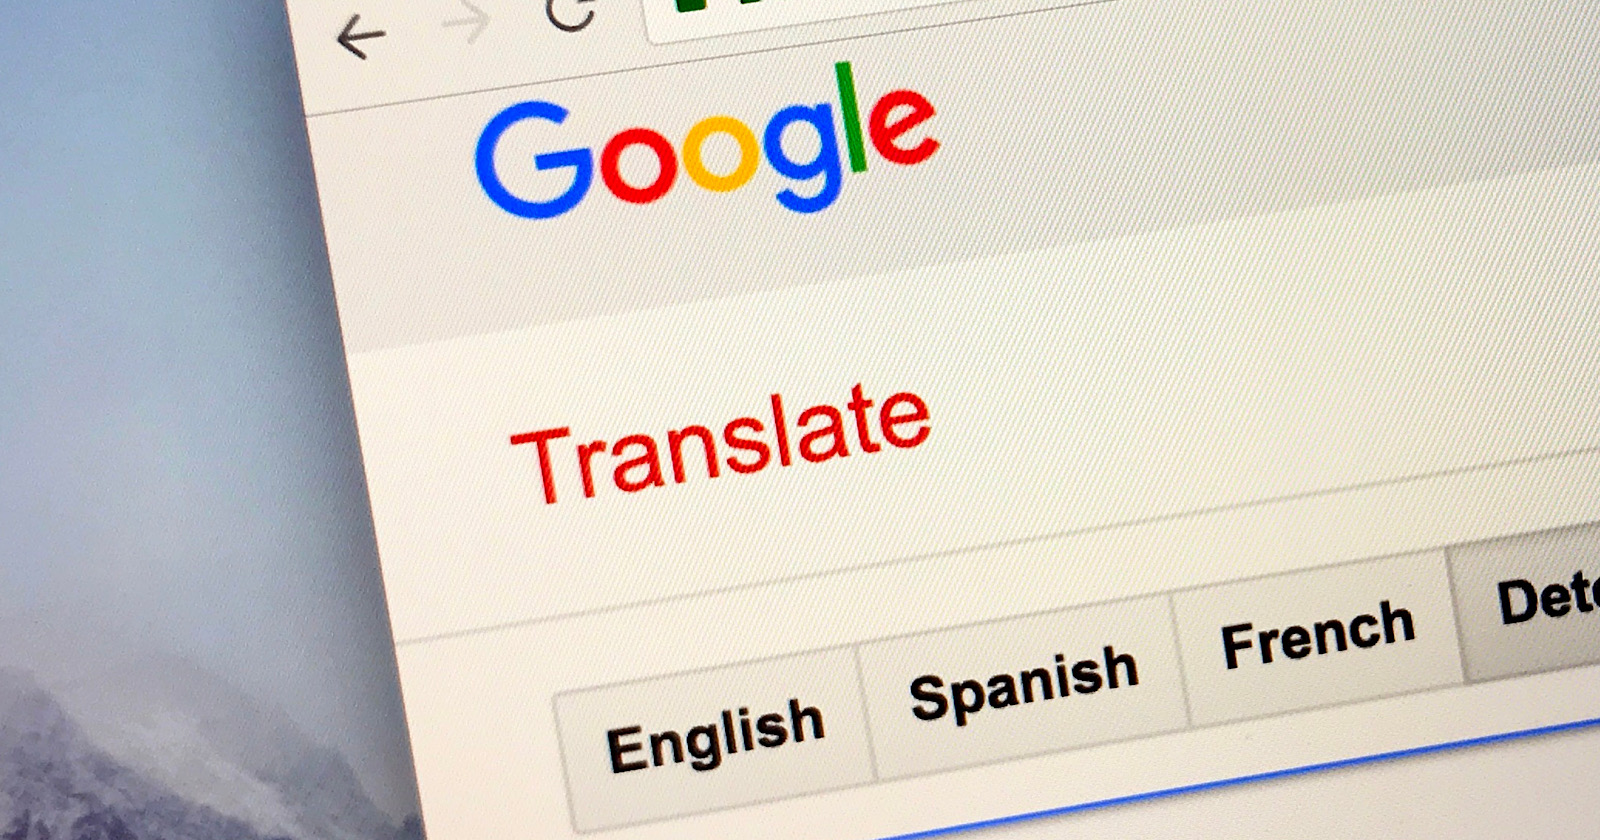 Google Translate Widget is Free Again for Some Websites to Use